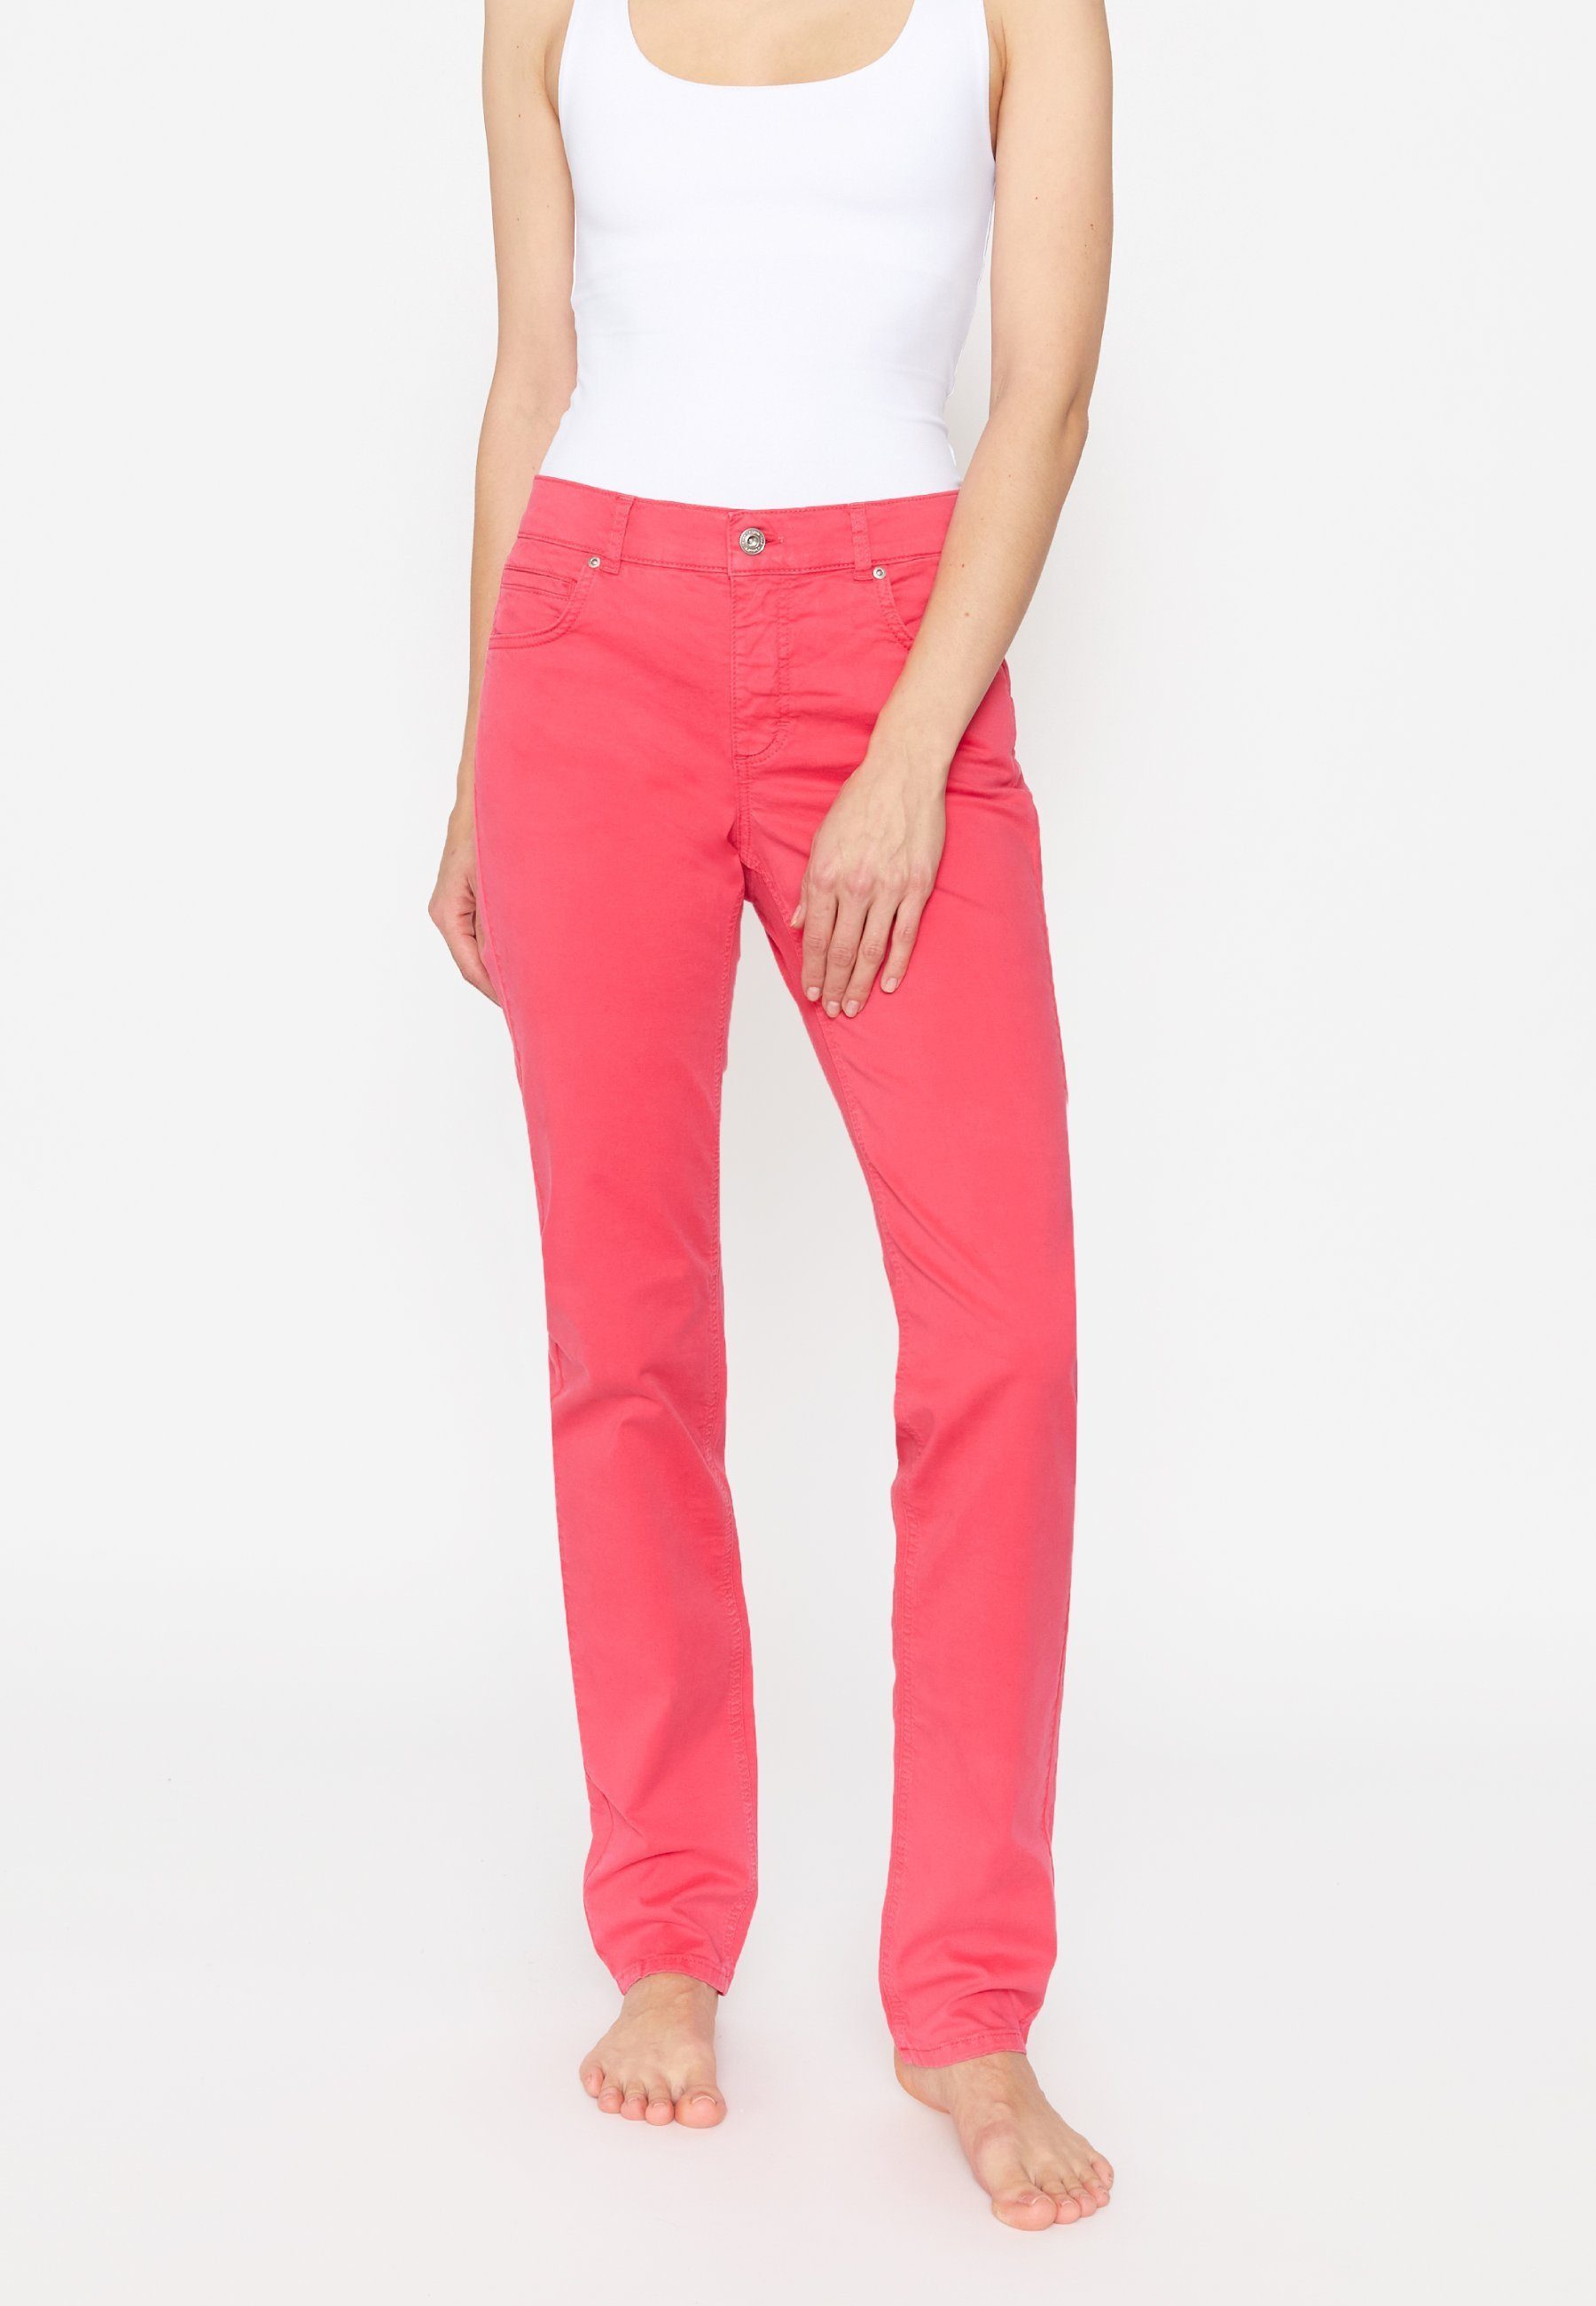 Denim Straight-Jeans Jeans Coloured mit Cici ANGELS Ton-in-Ton-Nähte pink